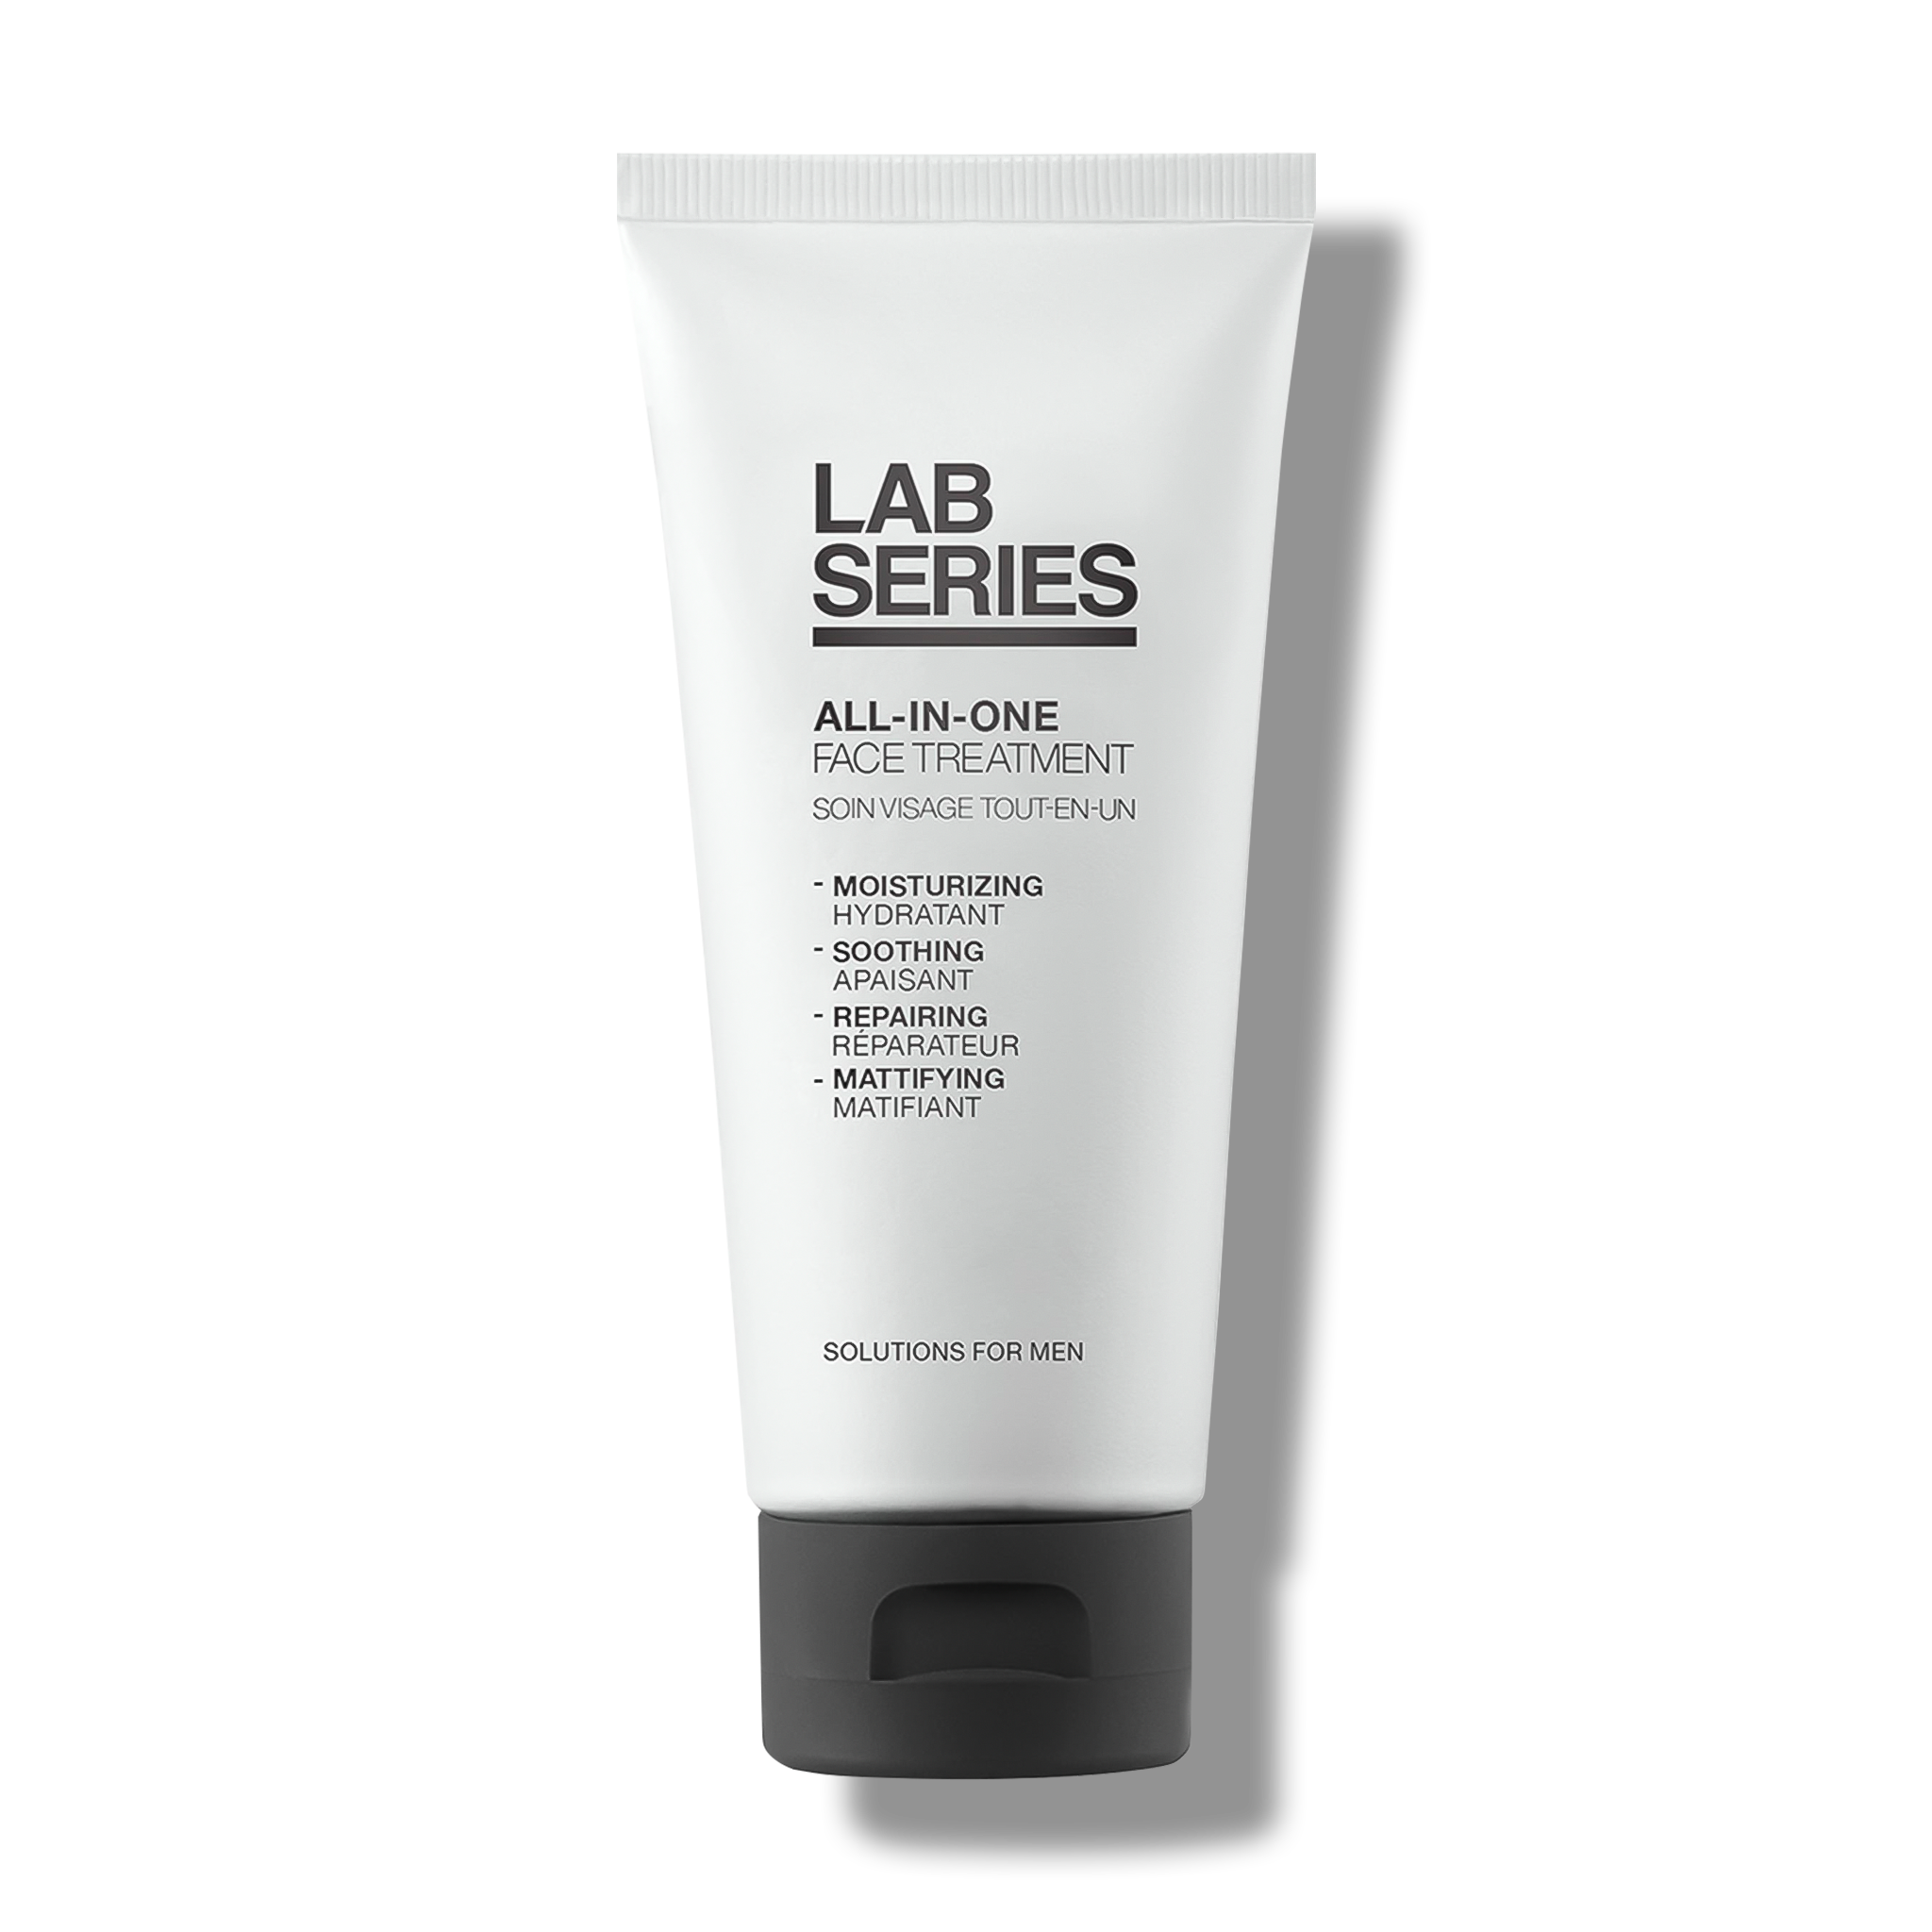 Lab Series All-in-One Face Treatment